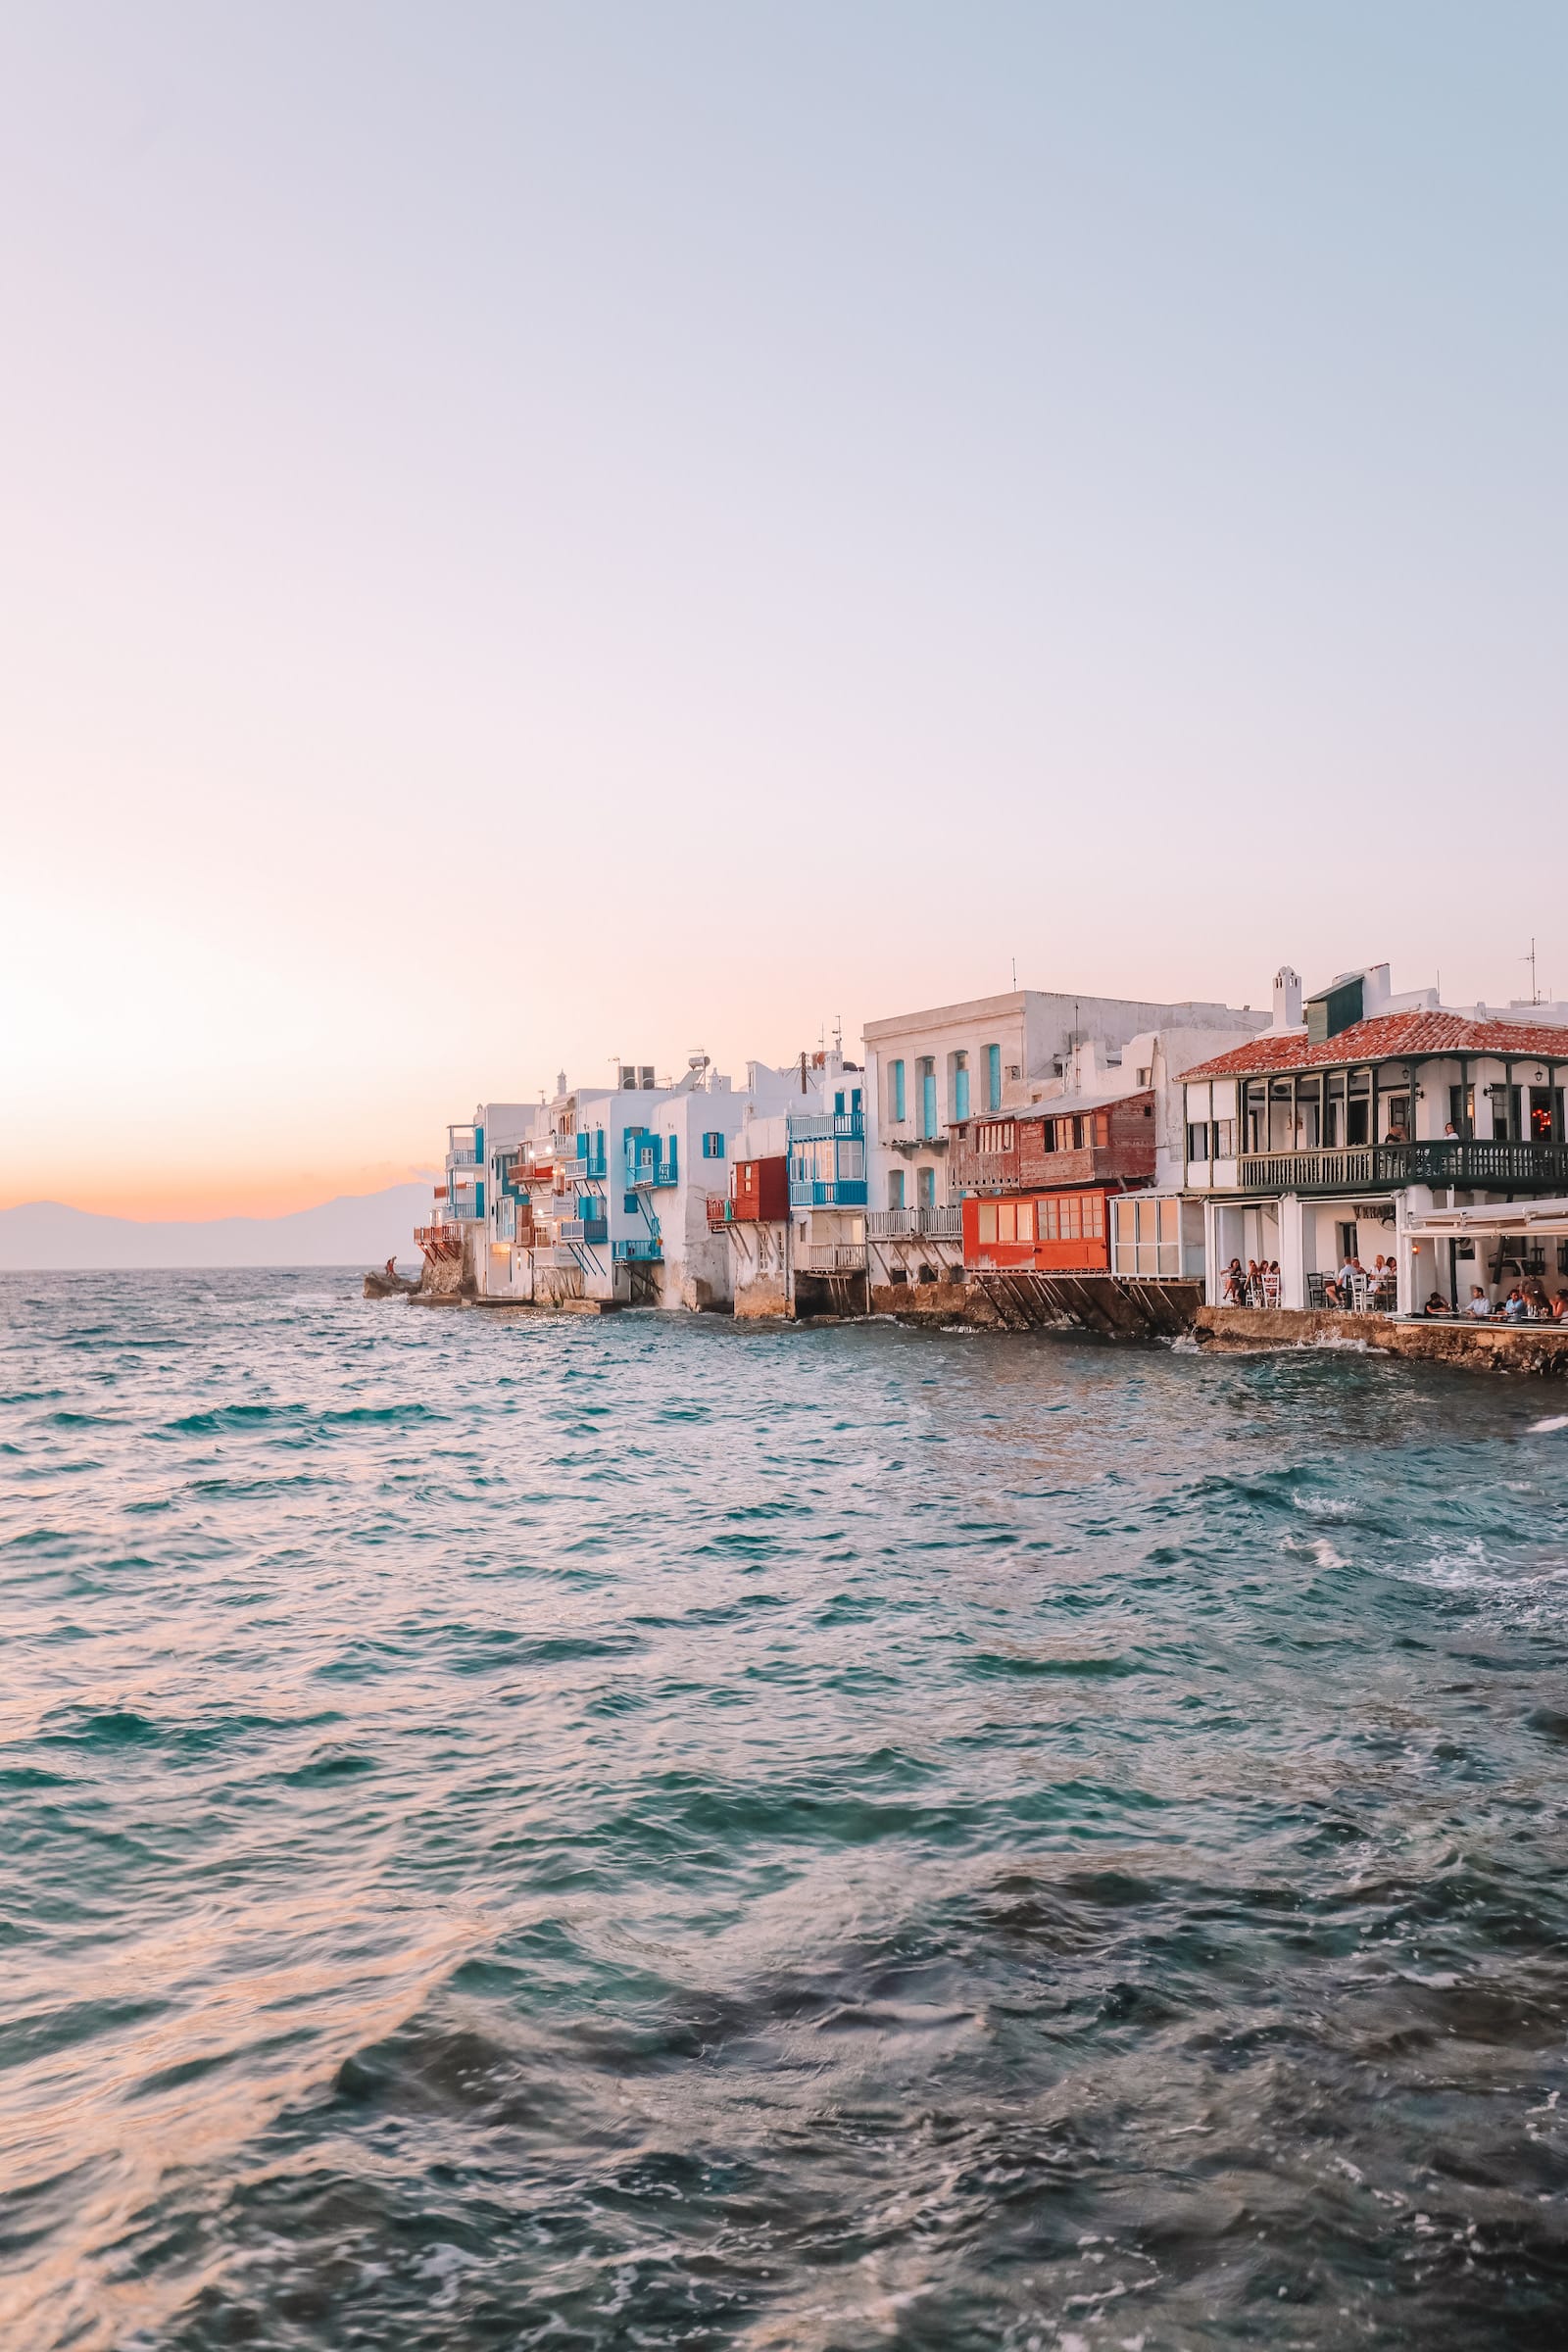 Top 10 best things to see & do on the Greek island of Mykonos